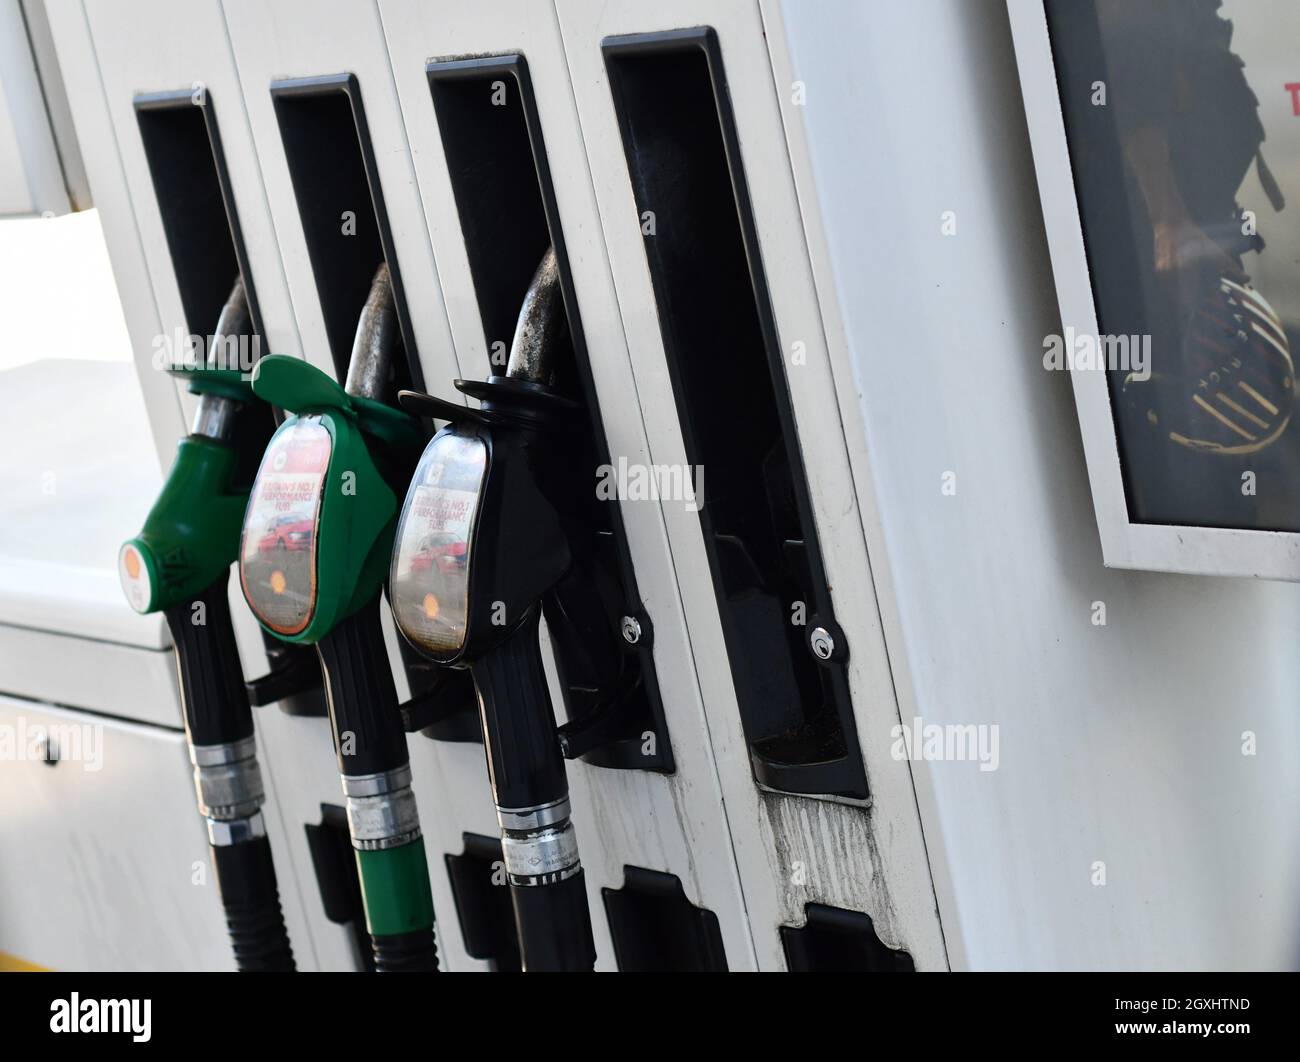 A bank of fuel pumps at a petrol station, unleaded petrol, premium petrol, premium diesel and standard diesel, one pump in use Stock Photo